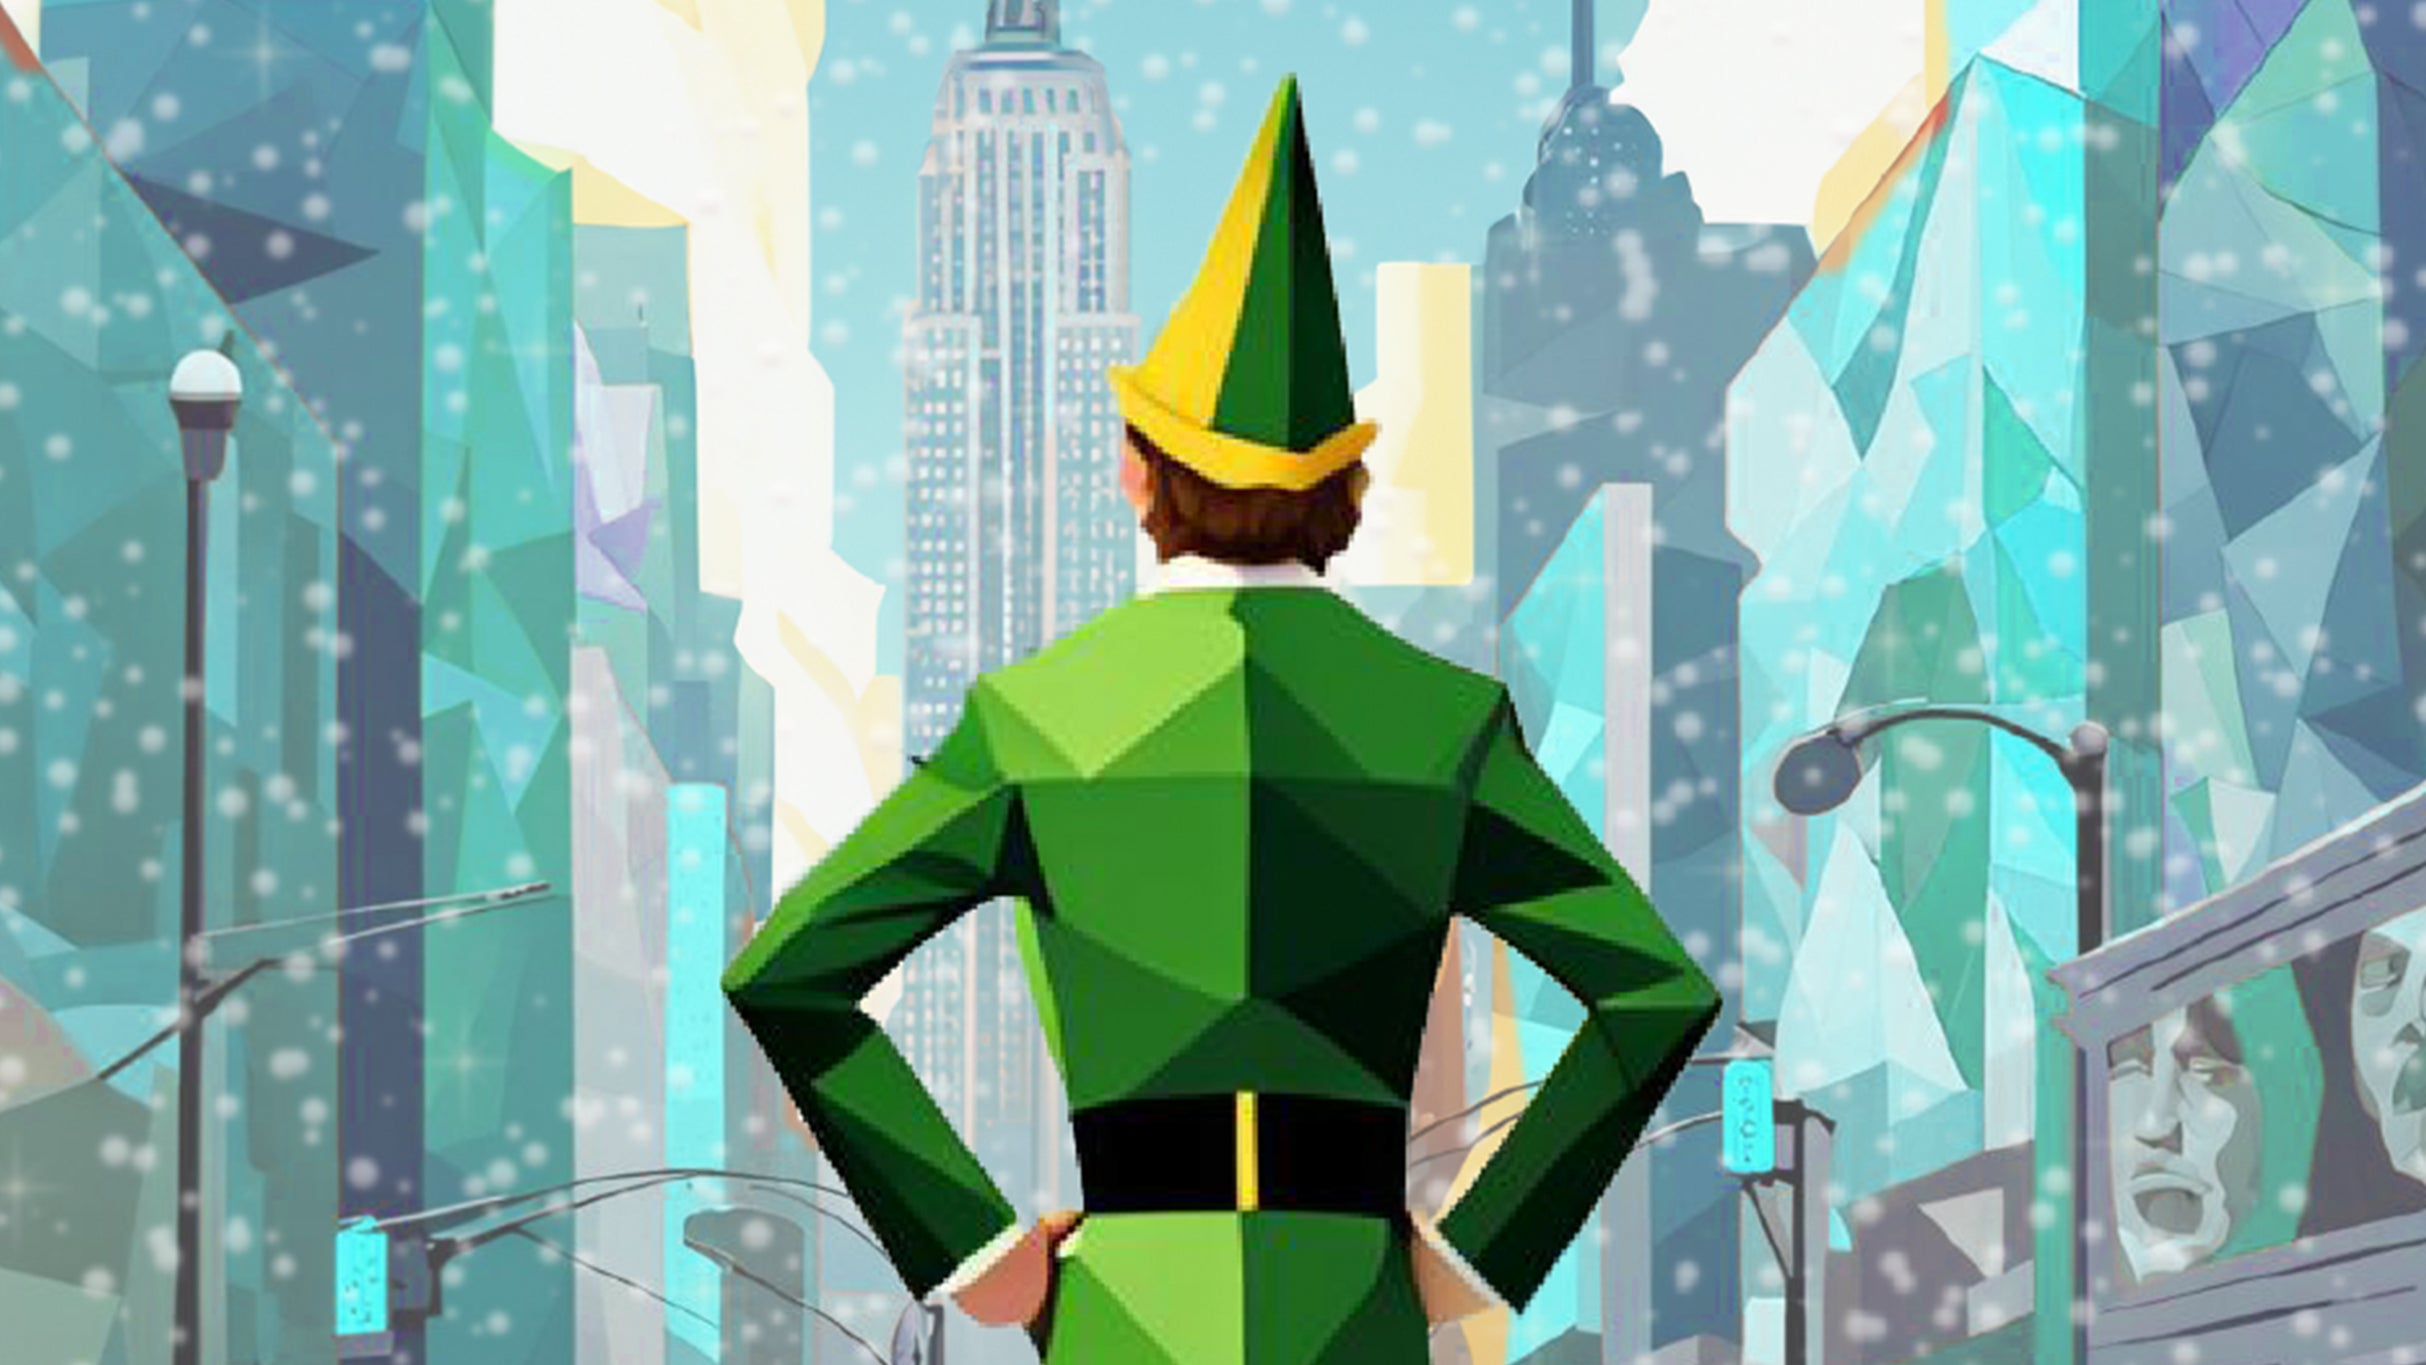 Premier Arts Presents: Elf the Musical at The Lerner Theatre